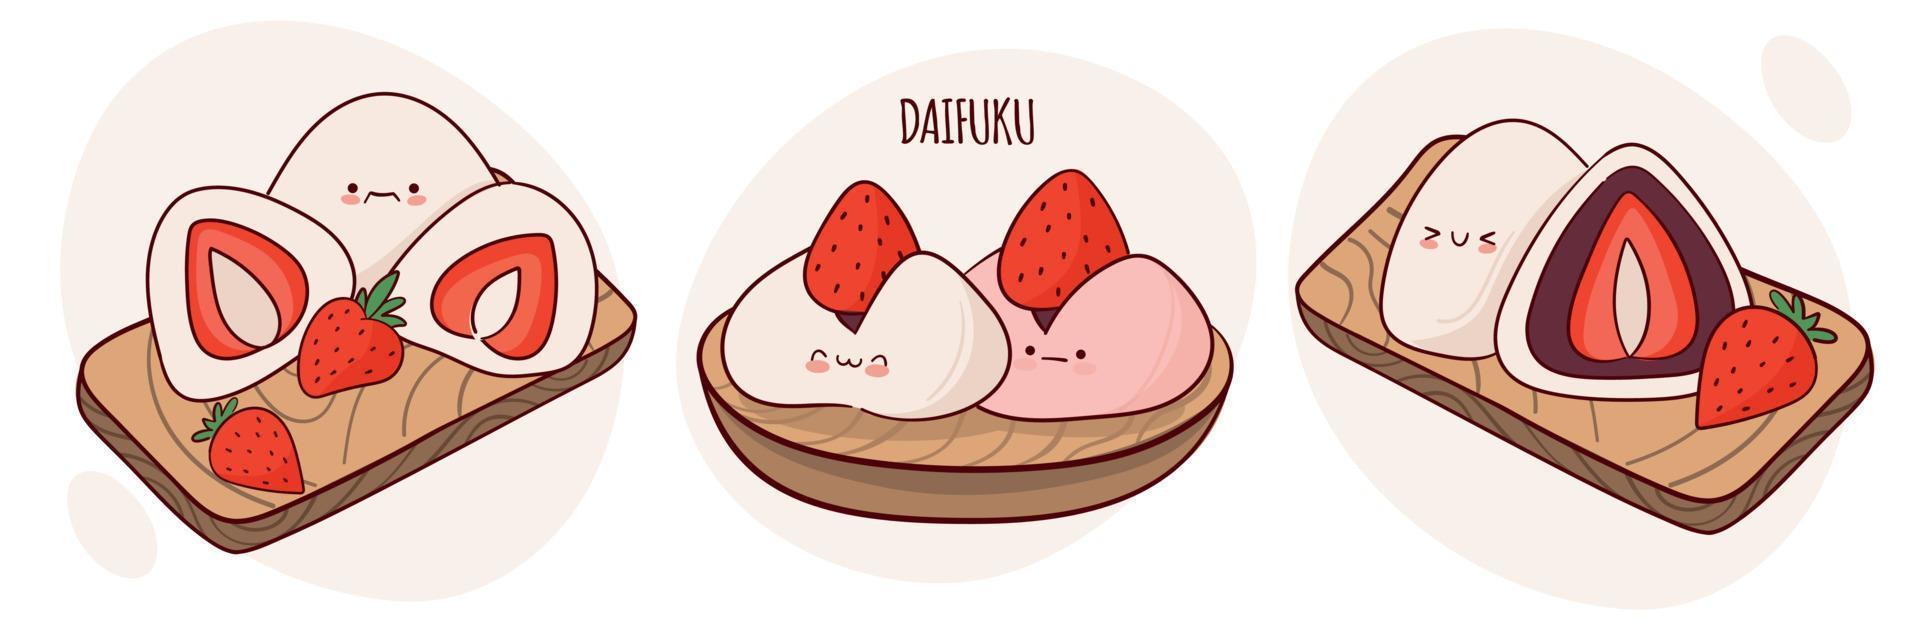 https://static.vecteezy.com/system/resources/previews/016/213/276/non_2x/draw-cute-kawaii-japan-tradition-sweet-mochi-daifuku-illustration-japanese-asian-traditional-food-cooking-menu-concept-doodle-cartoon-style-vector.jpg